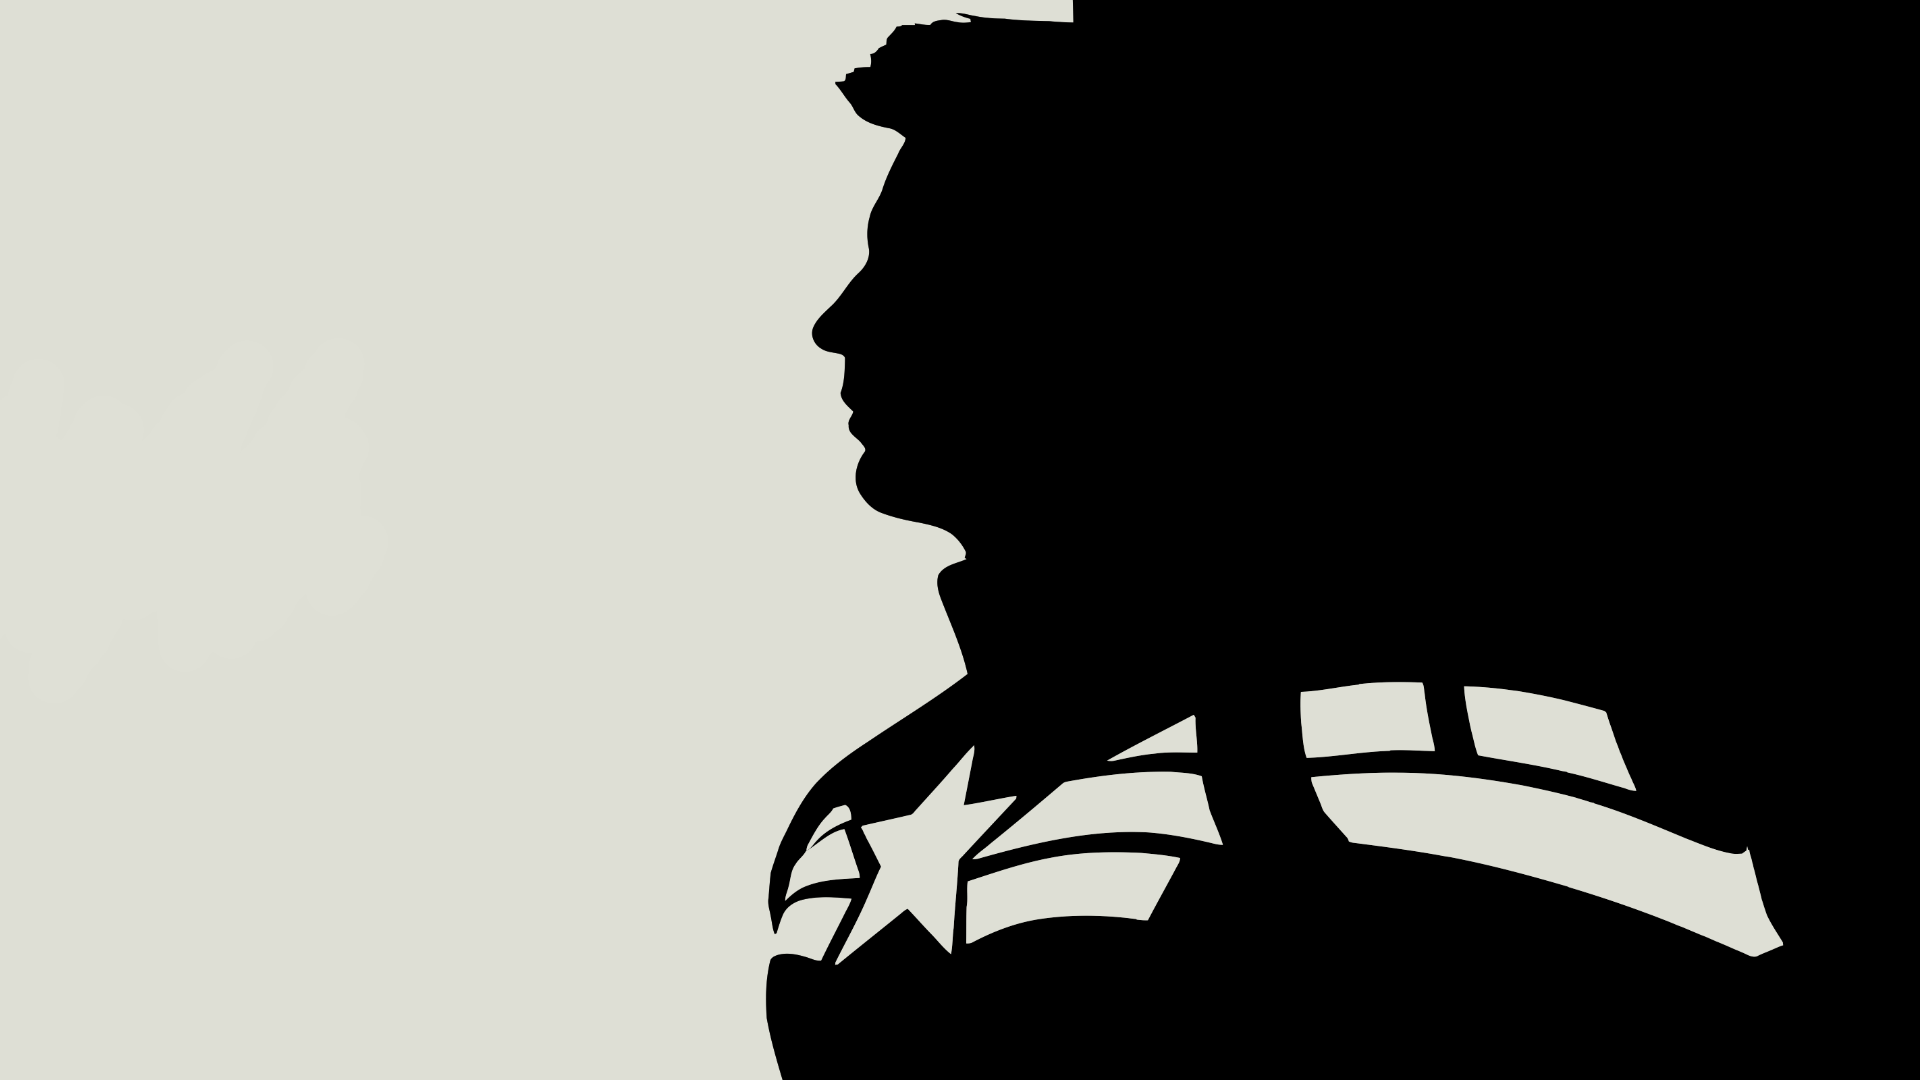 General 1920x1080 Captain America: The Winter Soldier vector